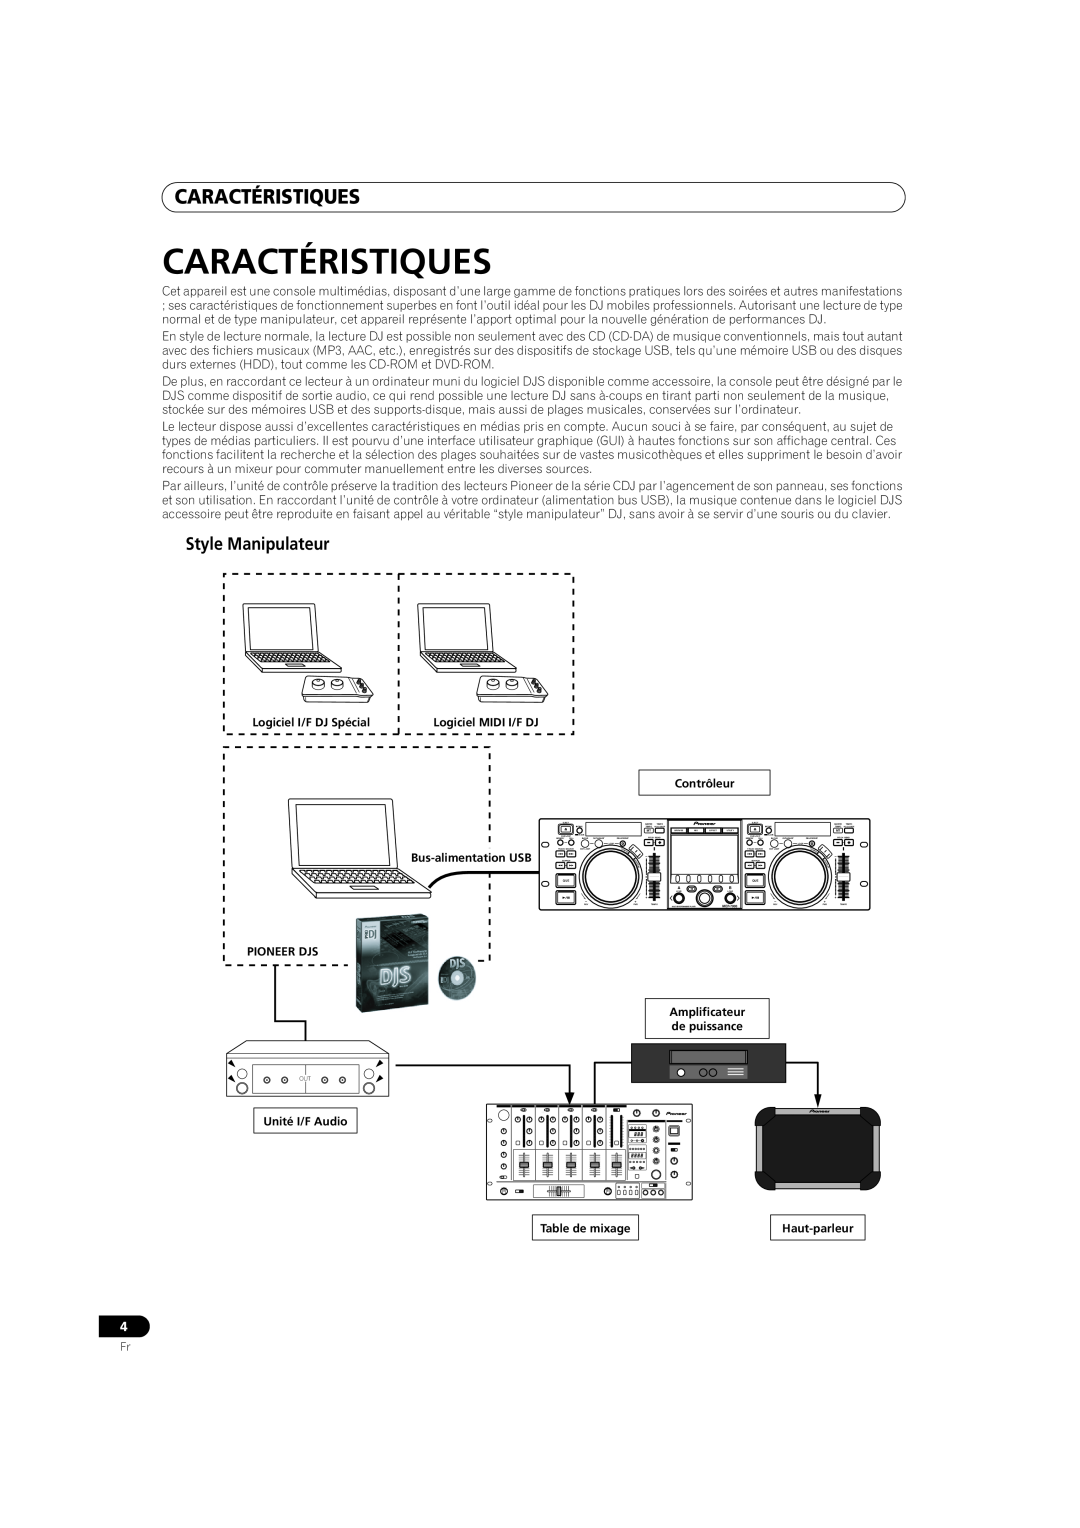 Pioneer MEP-7000 operating instructions Caractéristiques, Style Manipulateur 